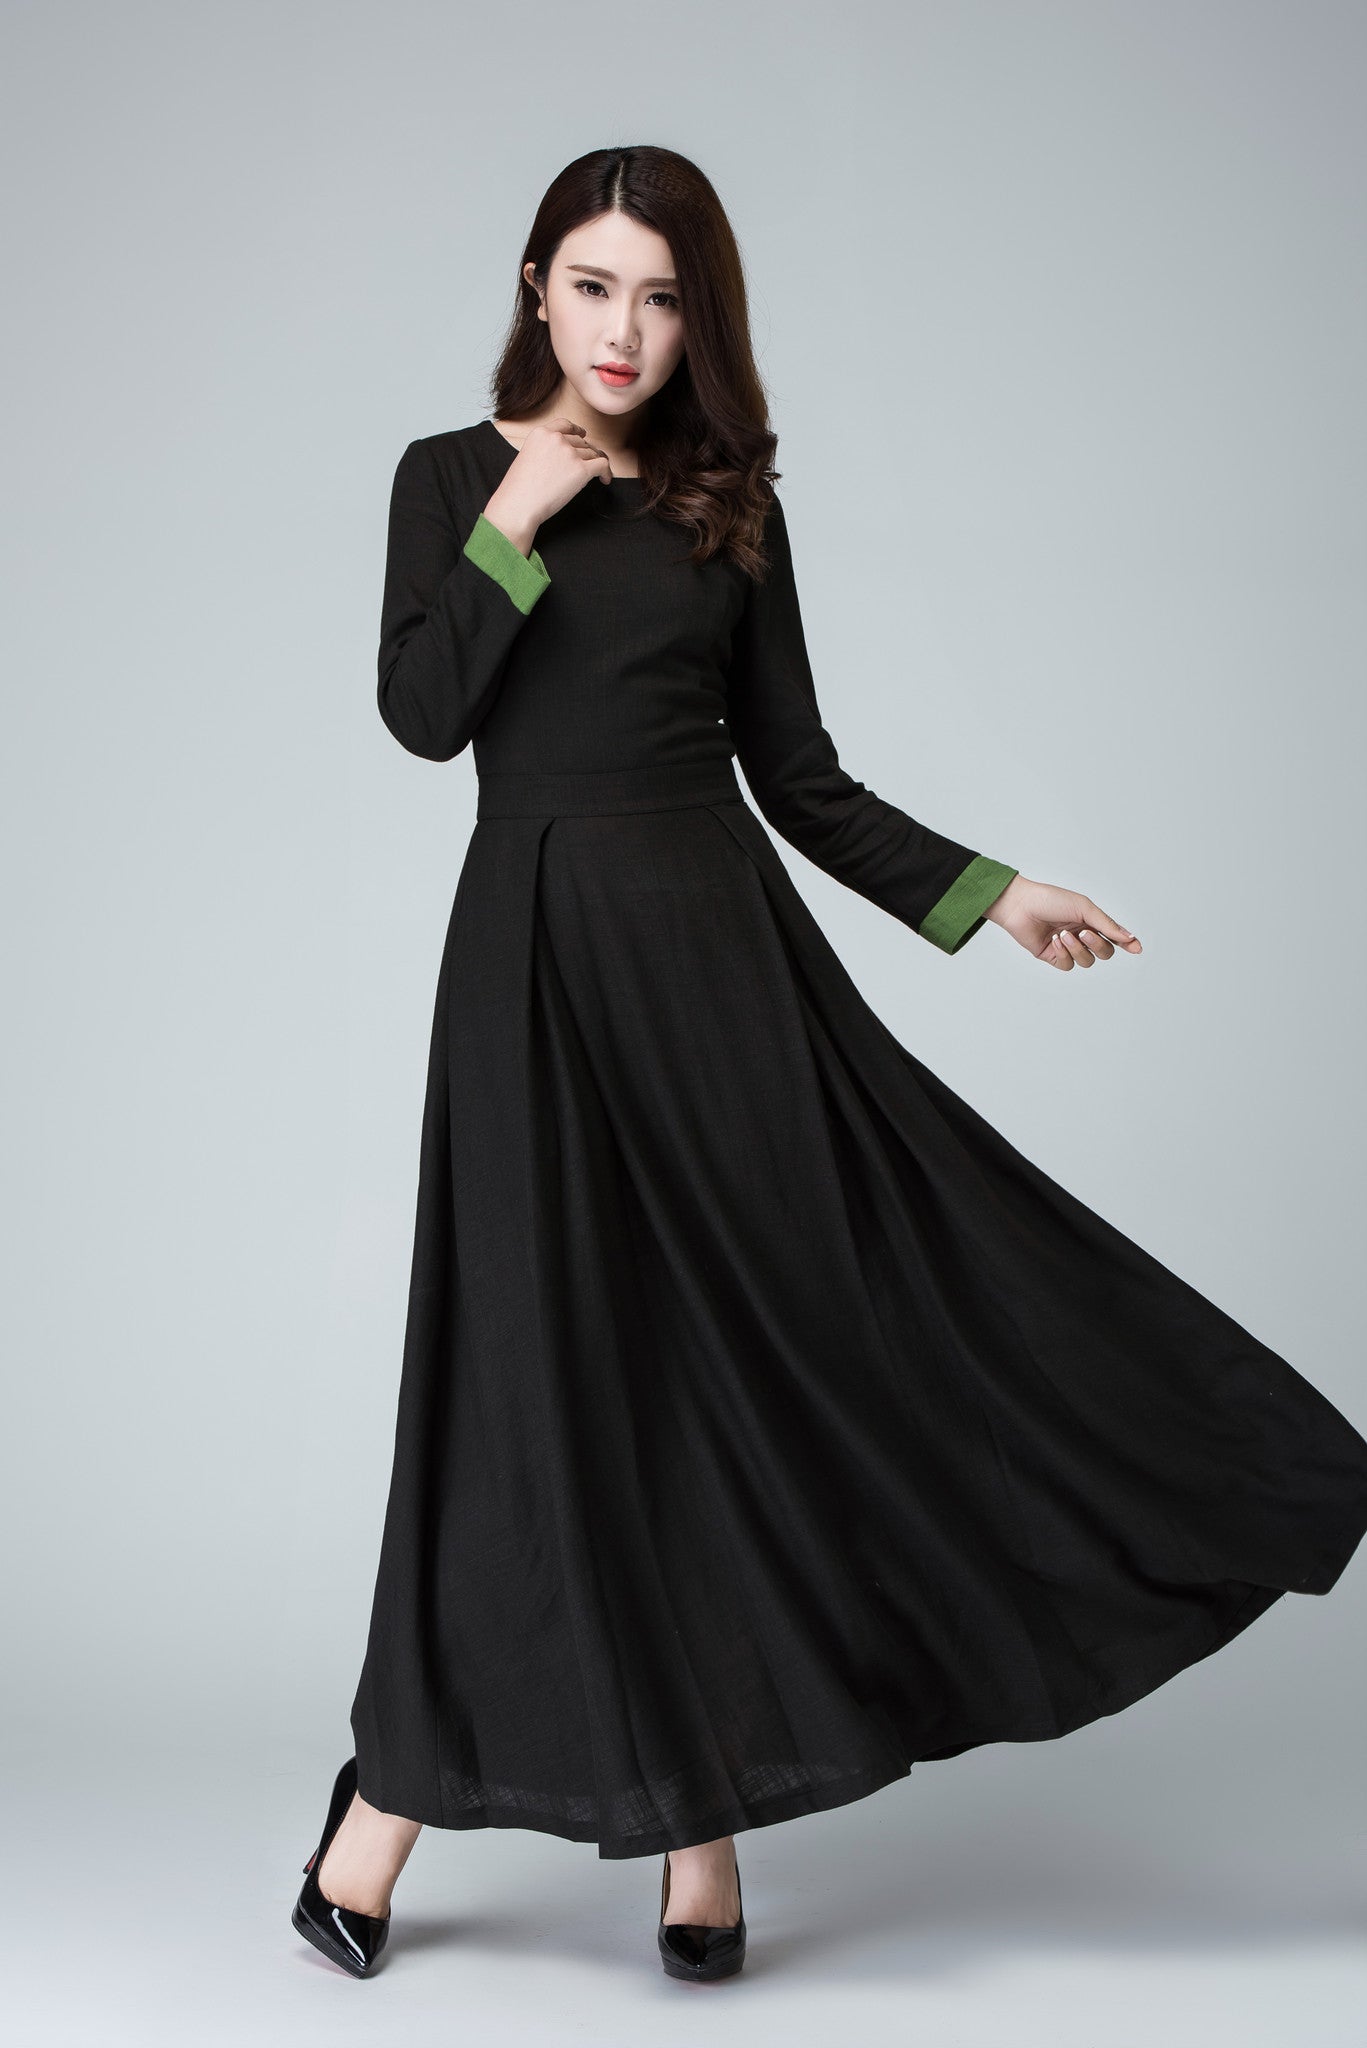 Black maxi dress with high neck and open back – ALBINA DYLA